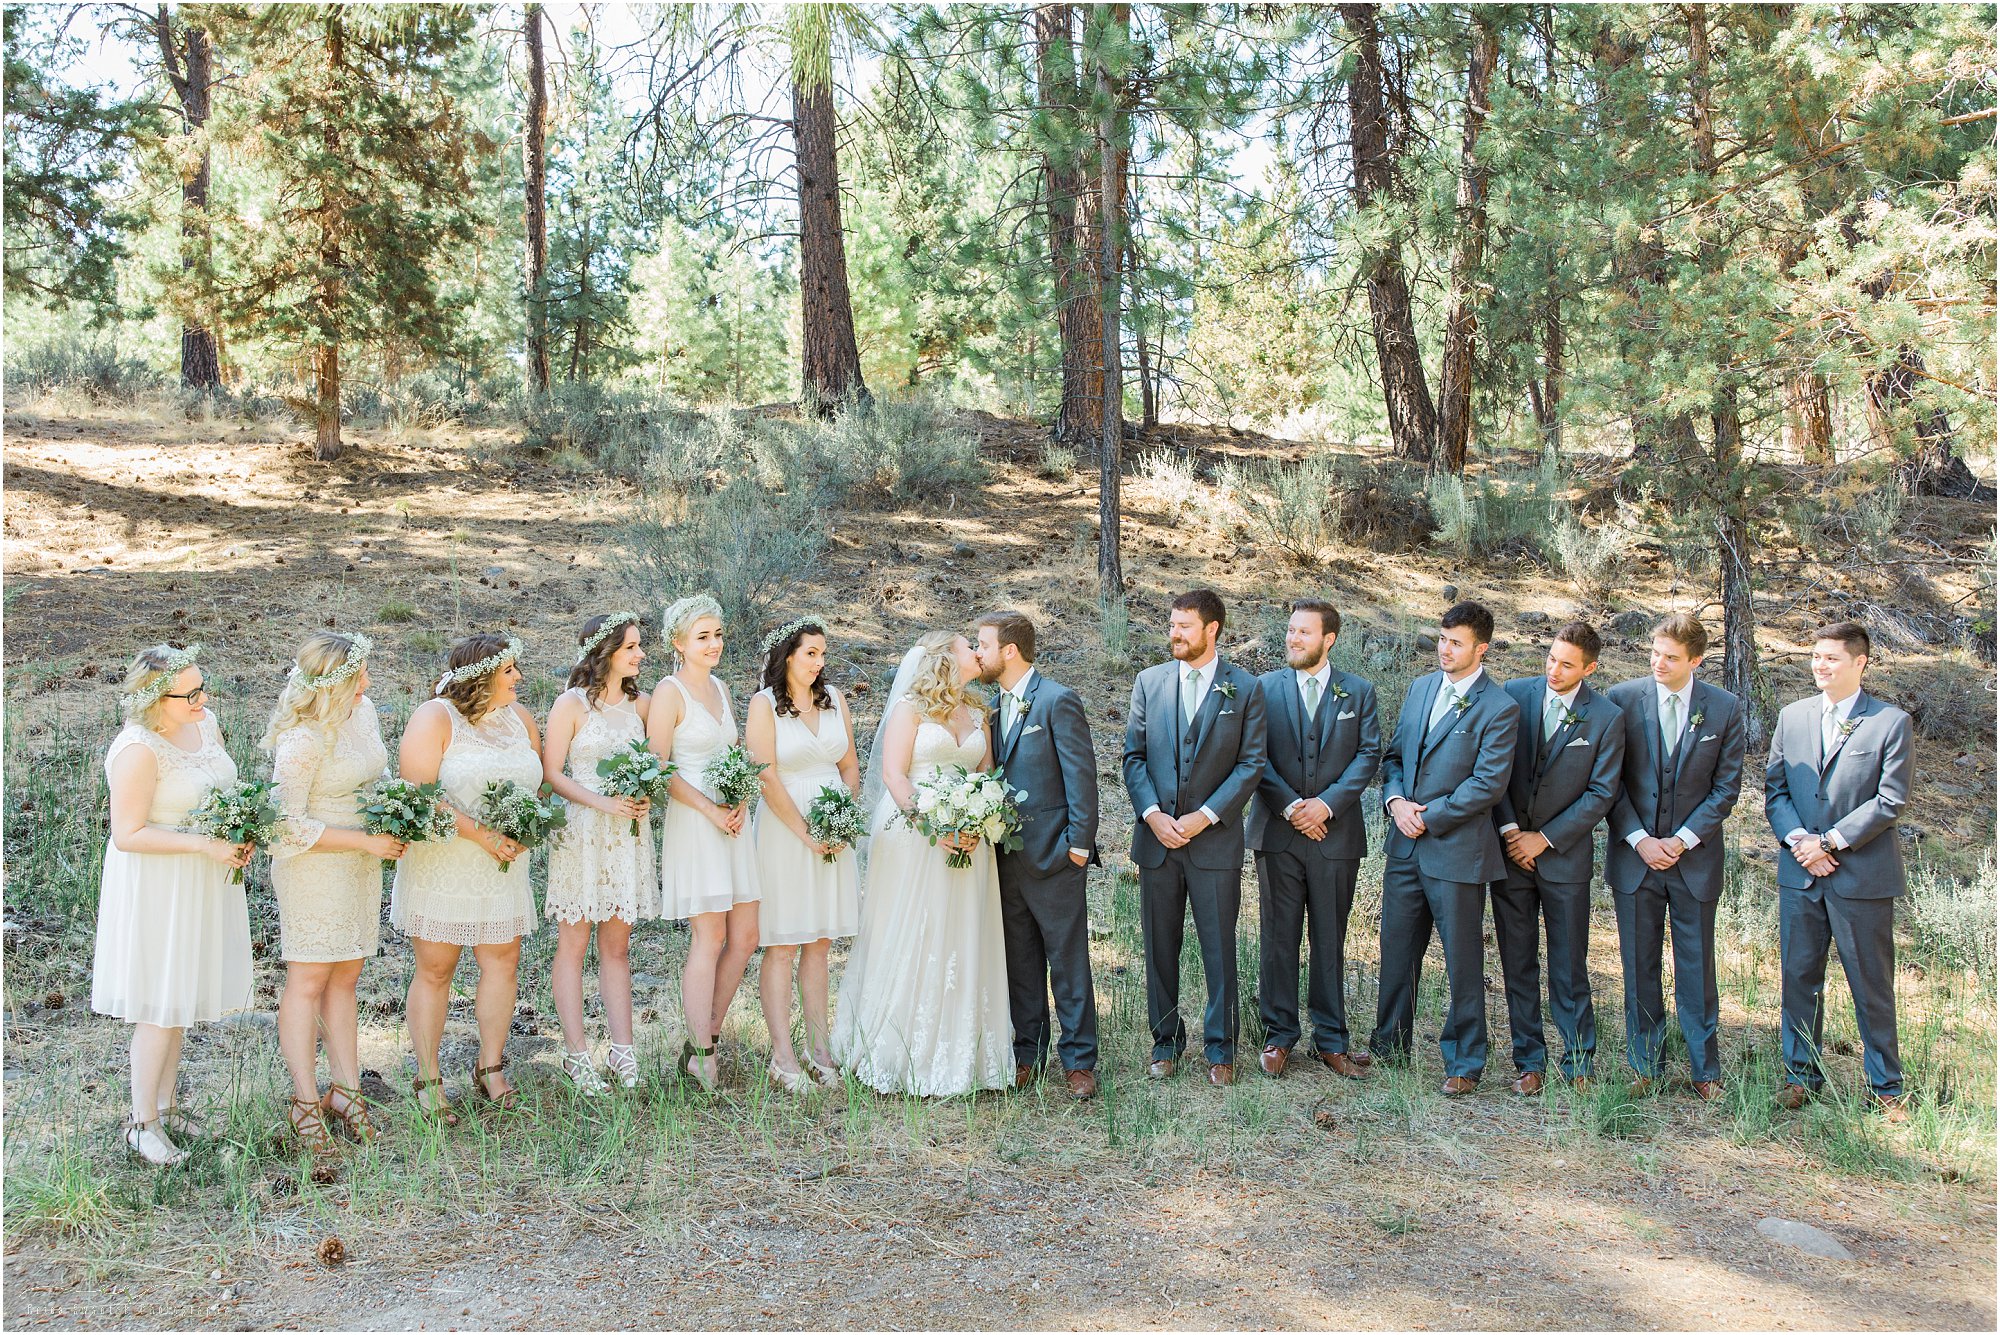 The cutest wedding party at this Aspen Hall wedding in Bend, OR. | Erica Swantek Photography